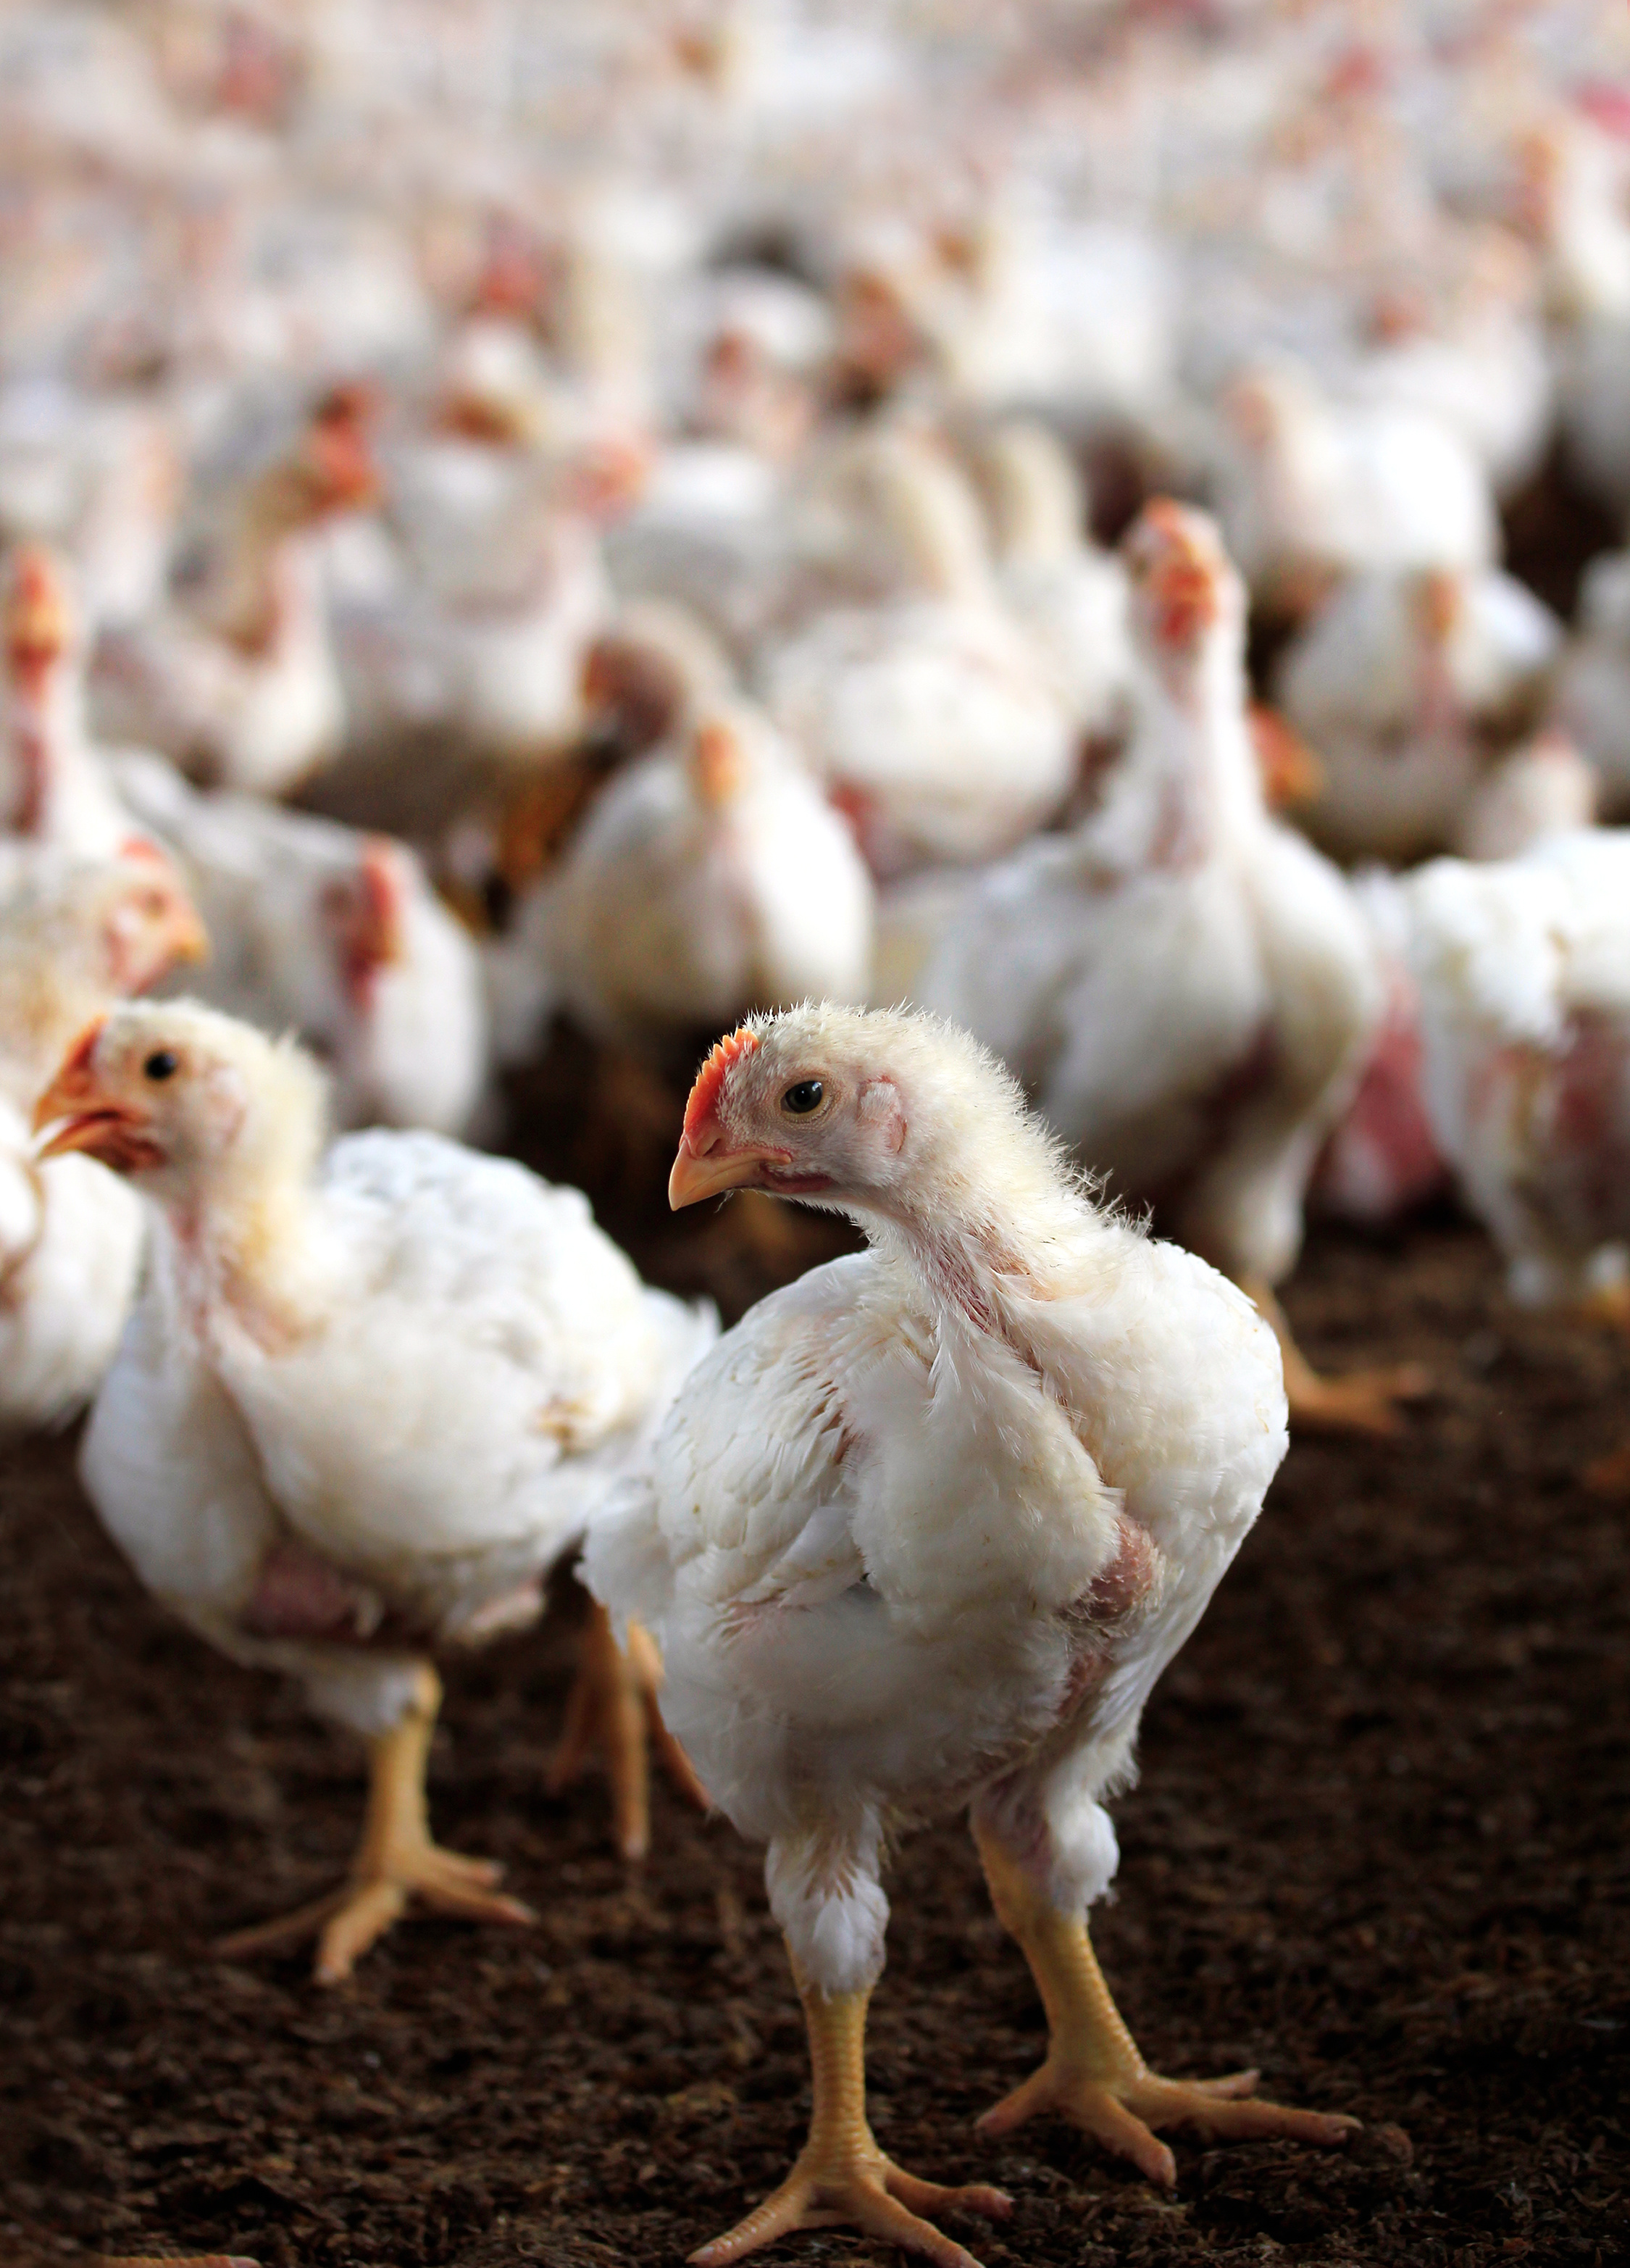 Managing the condition of litter in poultry houses is a crucial aspect of preventing Salmonella